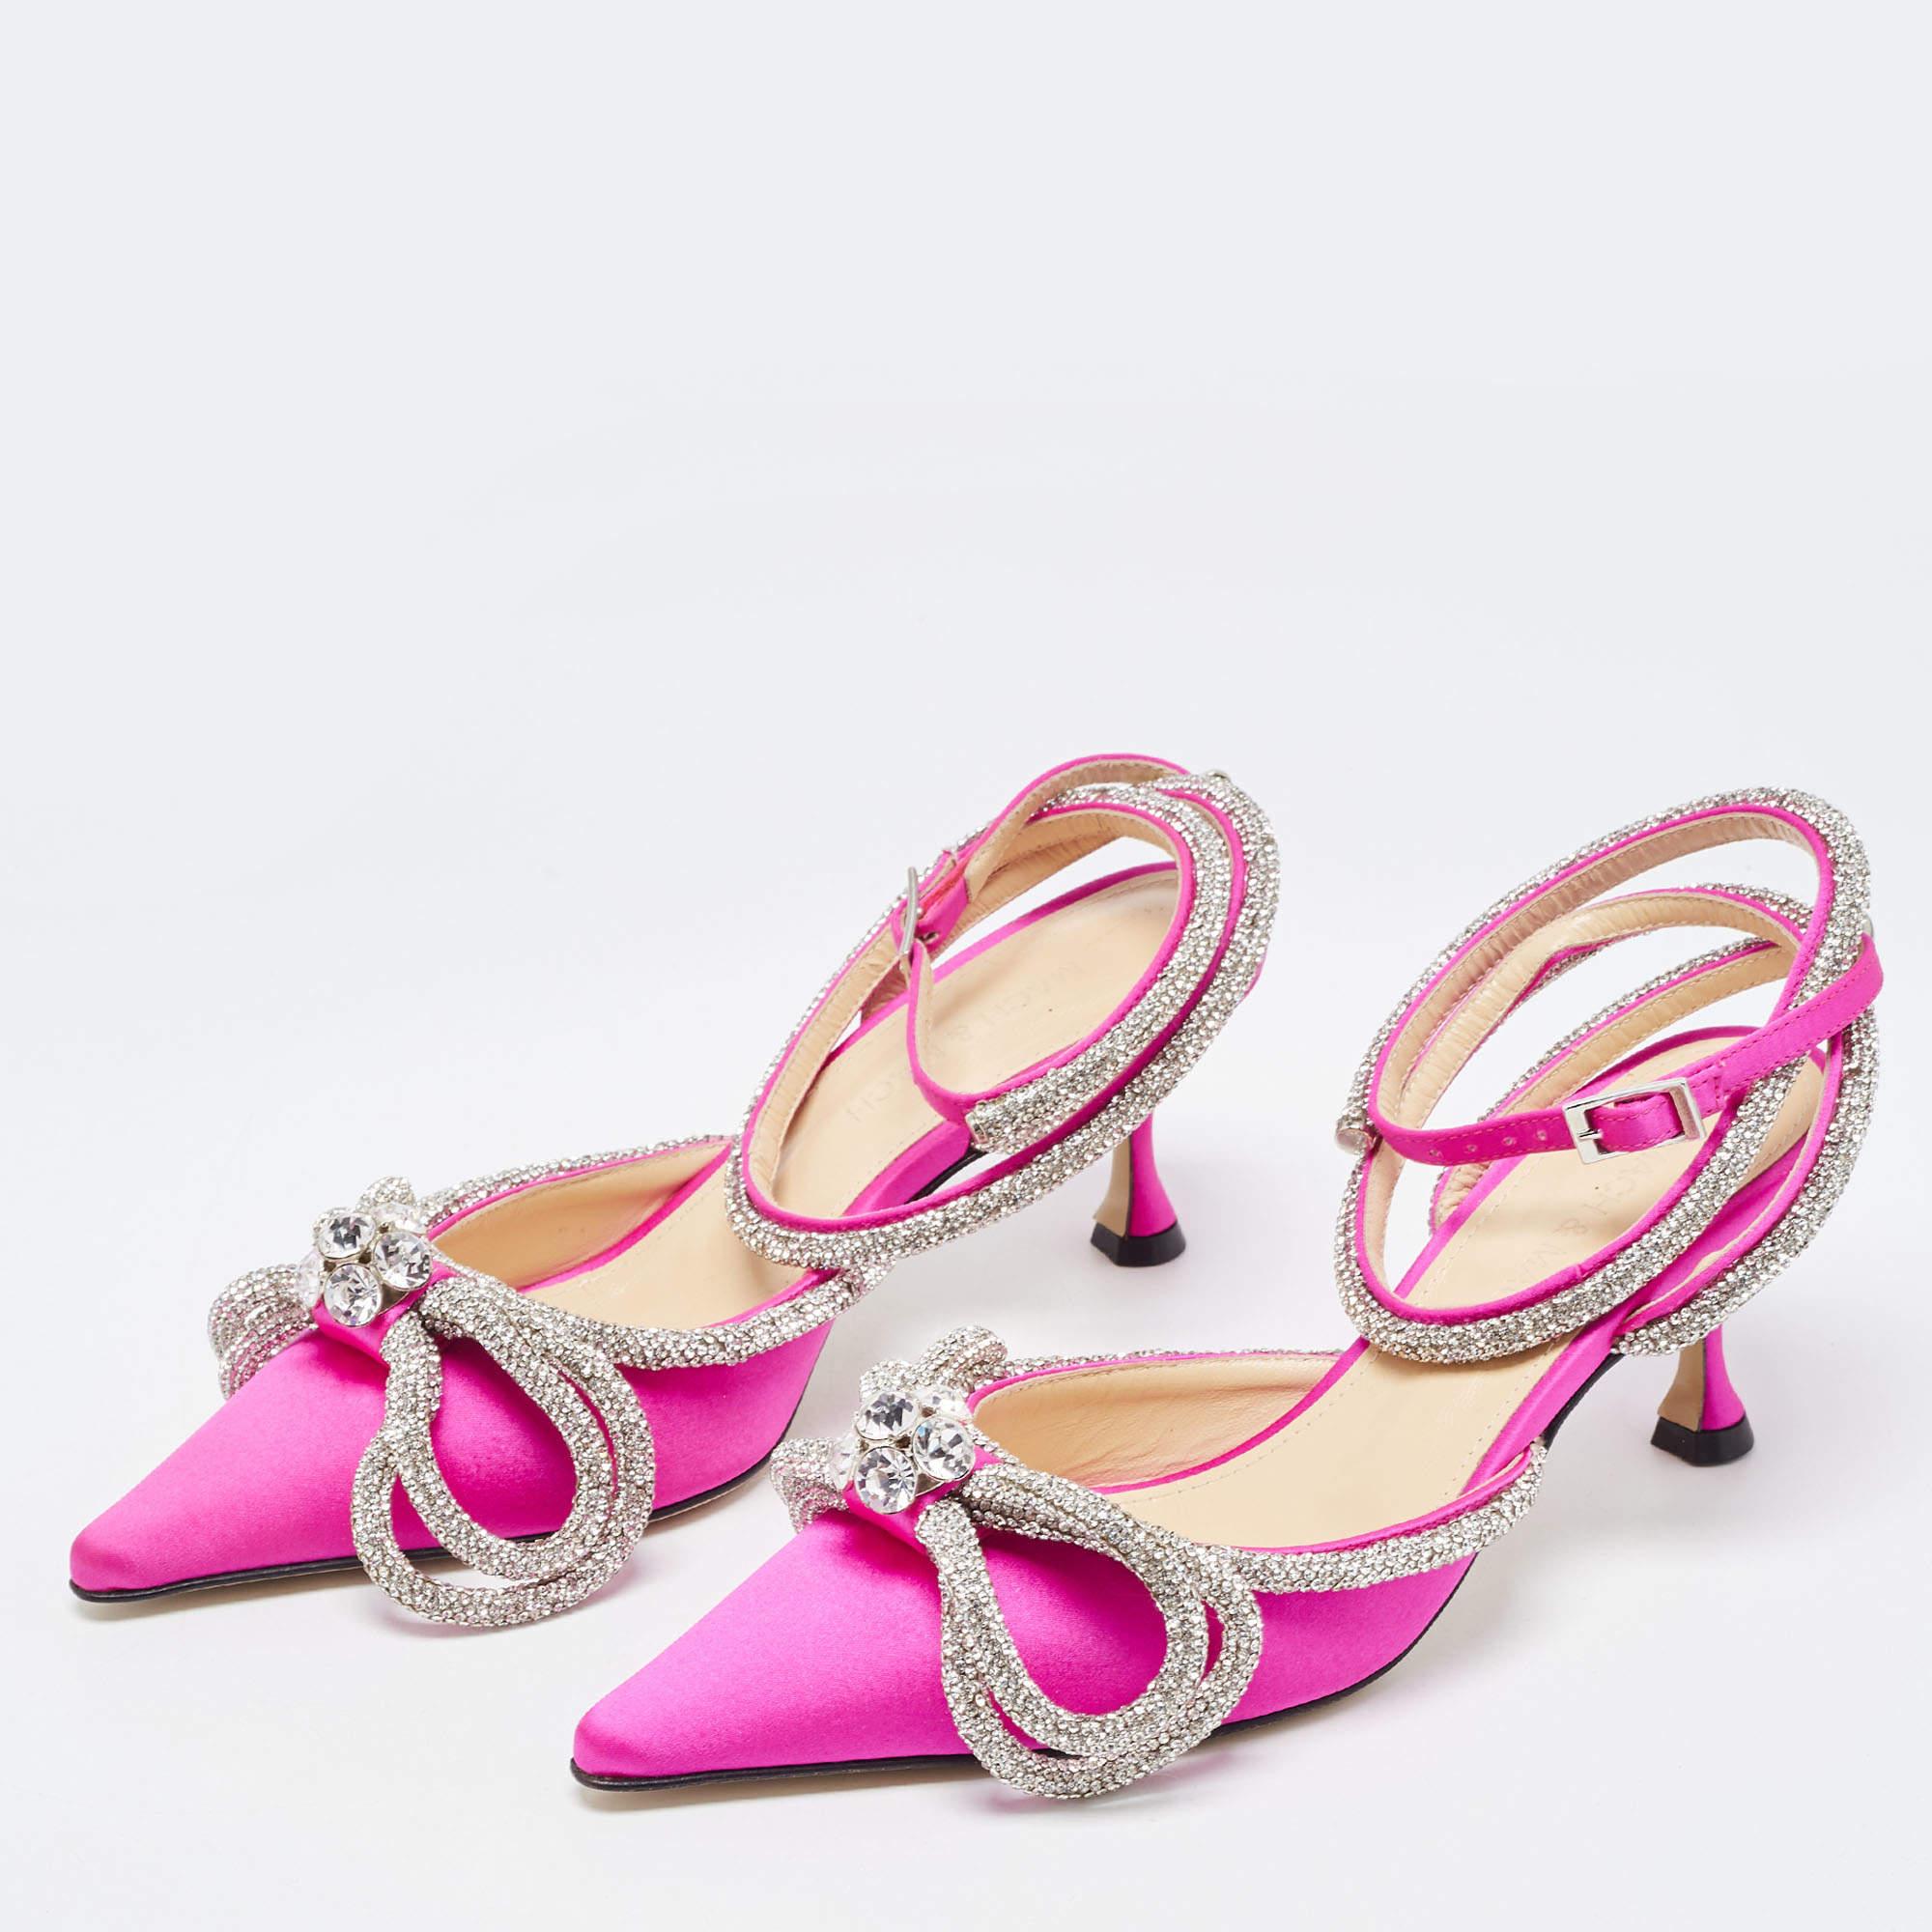 Mach & Mach Pink Satin Crystal Bow Ankle Strap Sandals Size 35 2